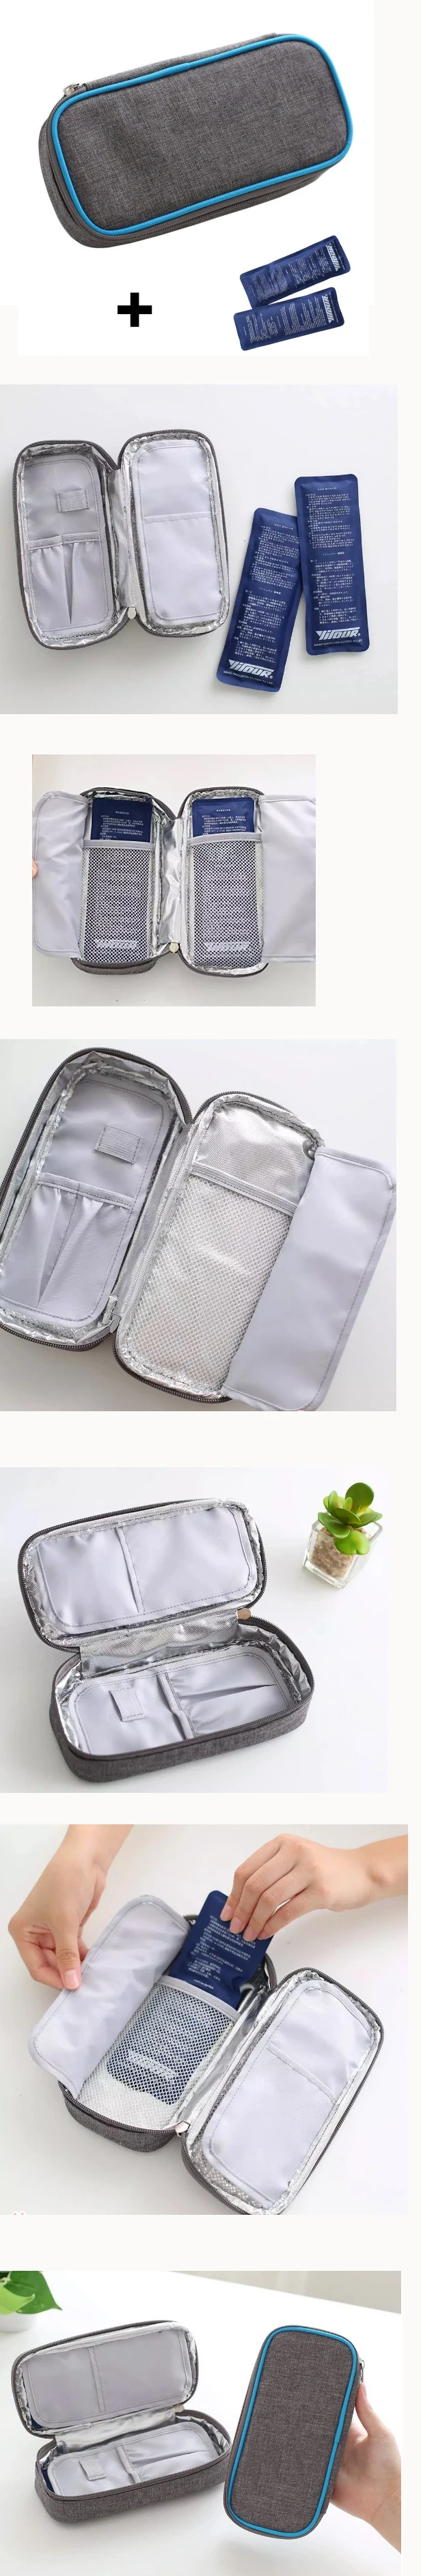 Medical waterproof portable insulin pen insulated cooler bag for diabetes